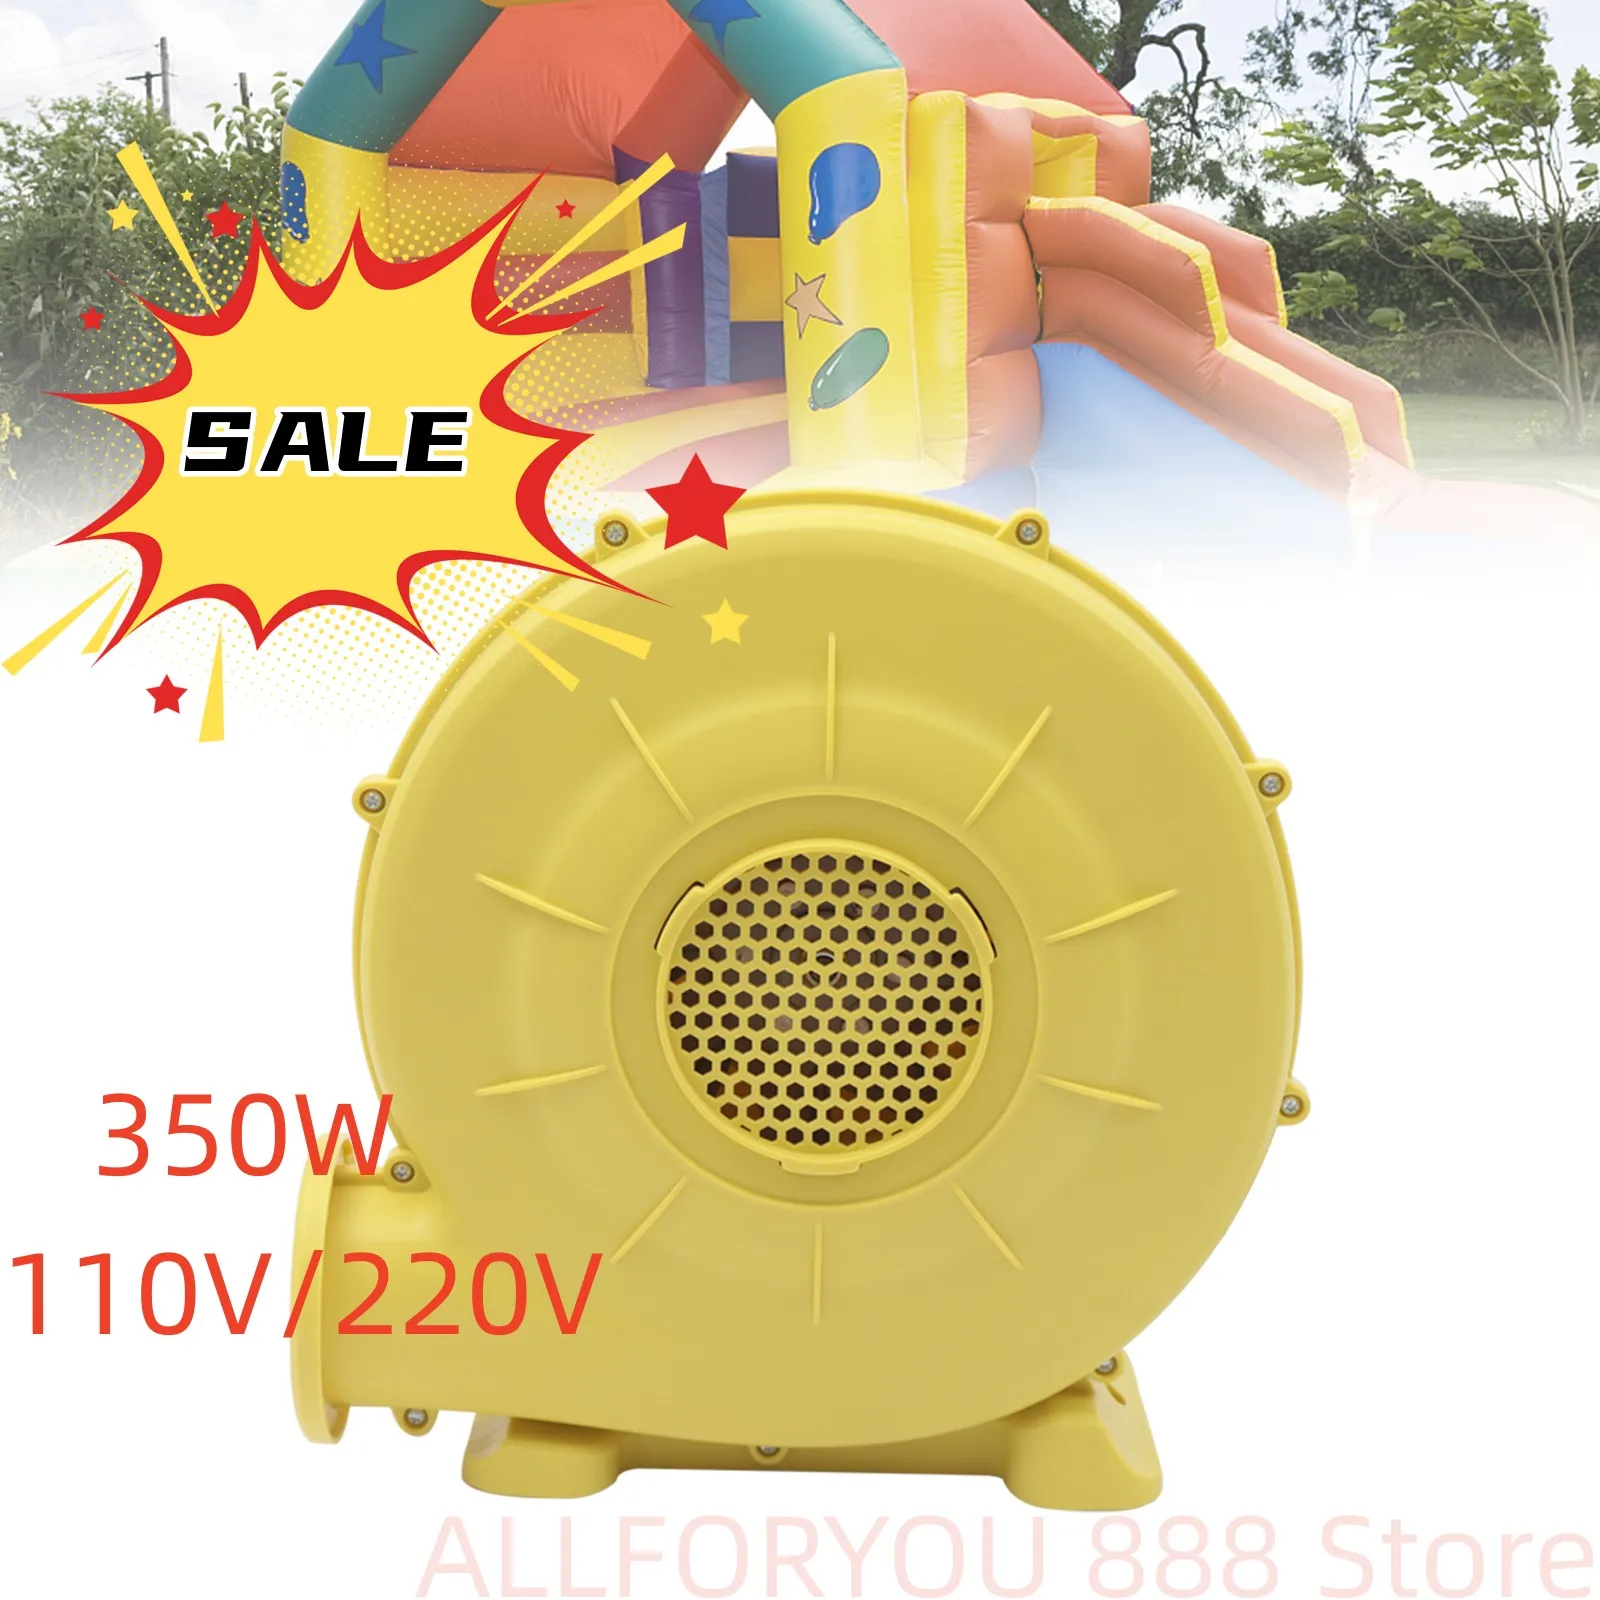 350W Air Blower Suitable For Outdoor Bounce Houses, Water slides, Obstacle Courses 110V/220V rts inflatable summer outdoor sildes air bounce water amusement play equipment inflatble water double slide bubble ball pit